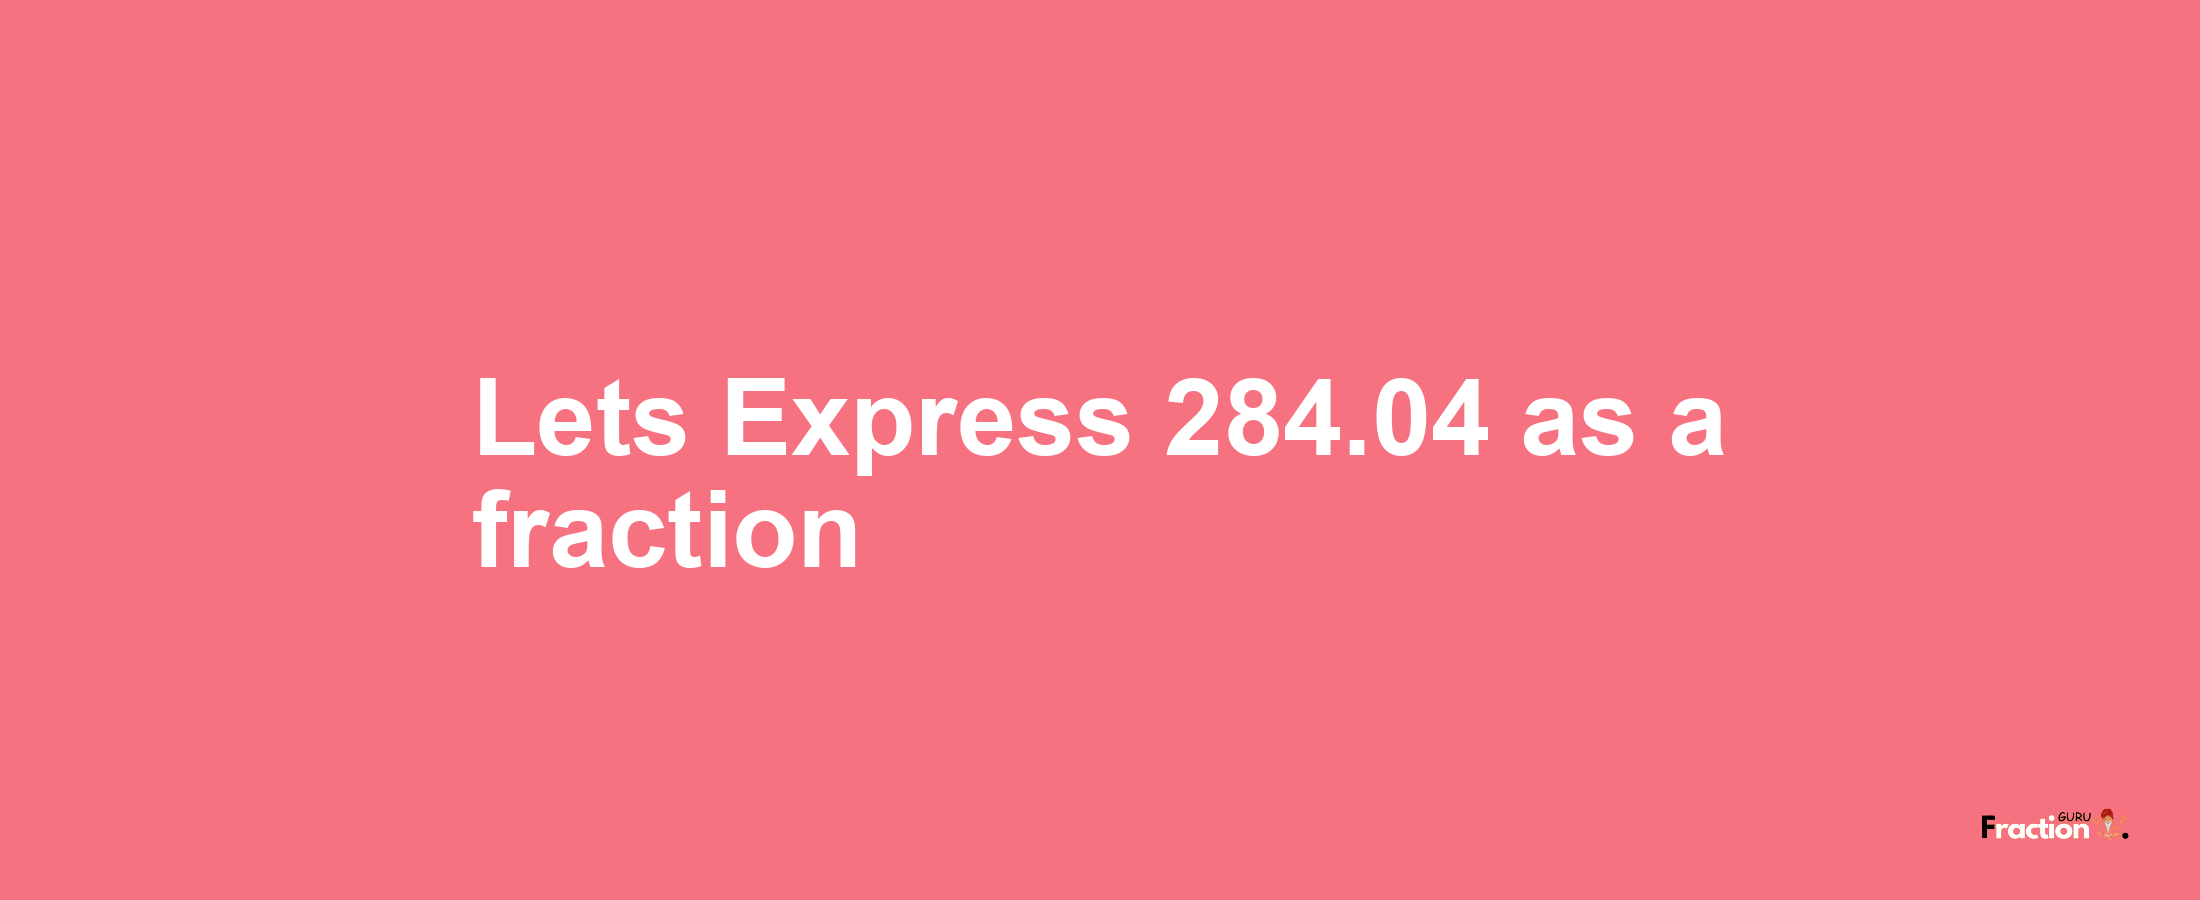 Lets Express 284.04 as afraction